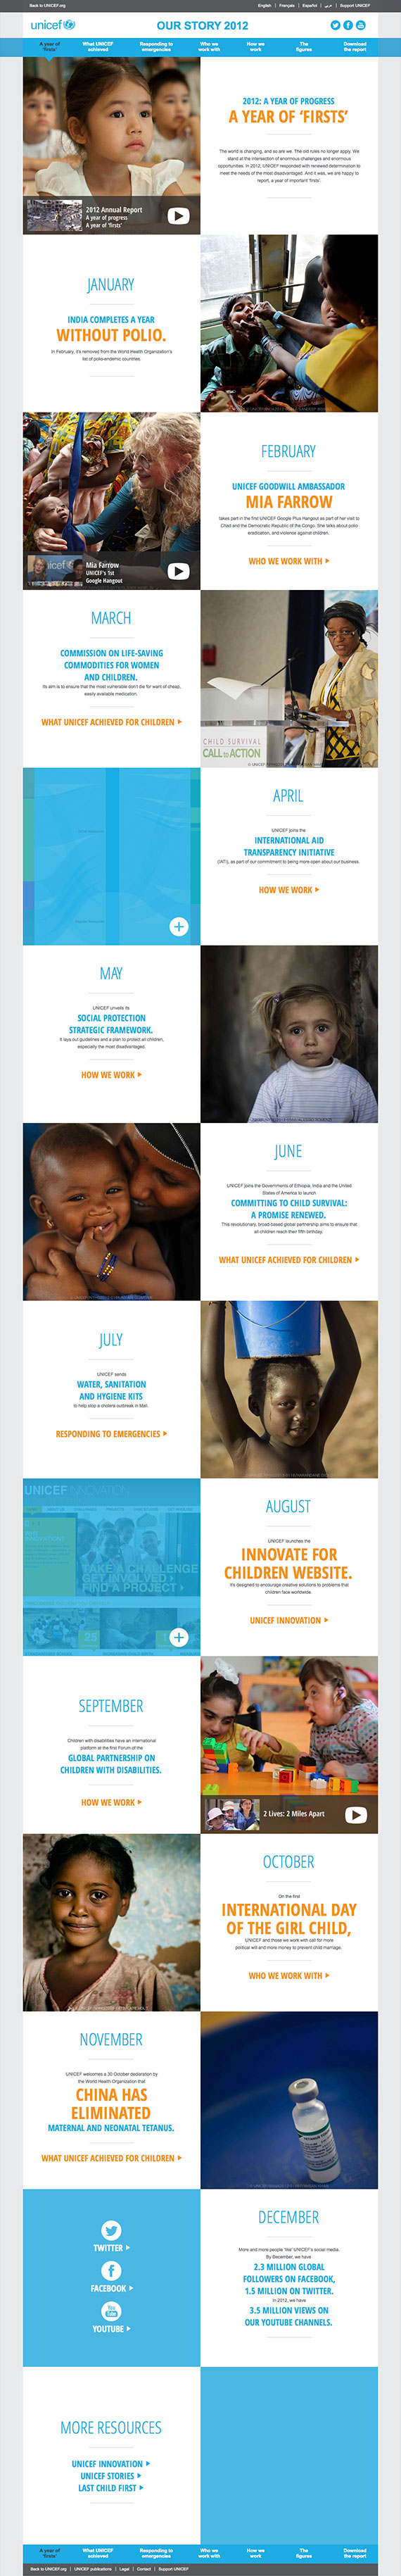 UNICEF Our Story 2012